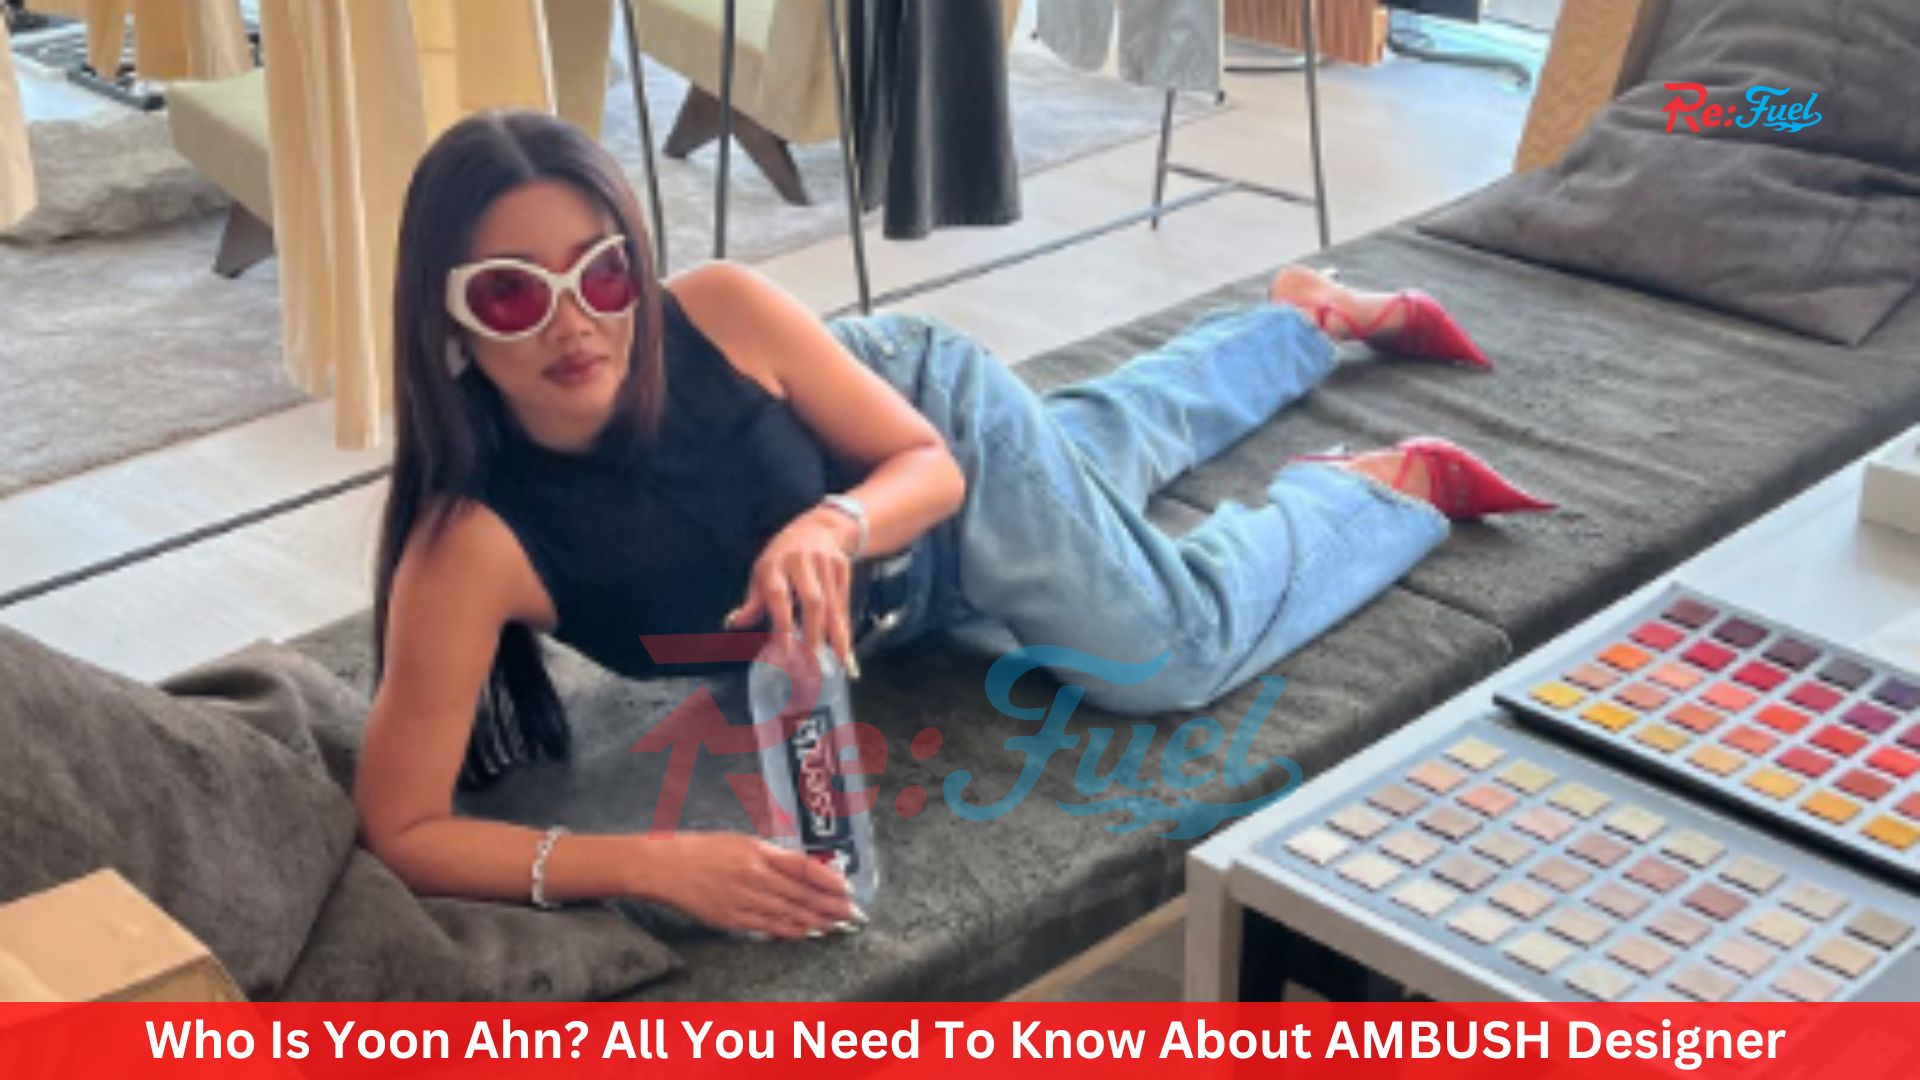 Who Is Yoon Ahn? All You Need To Know About AMBUSH Designer